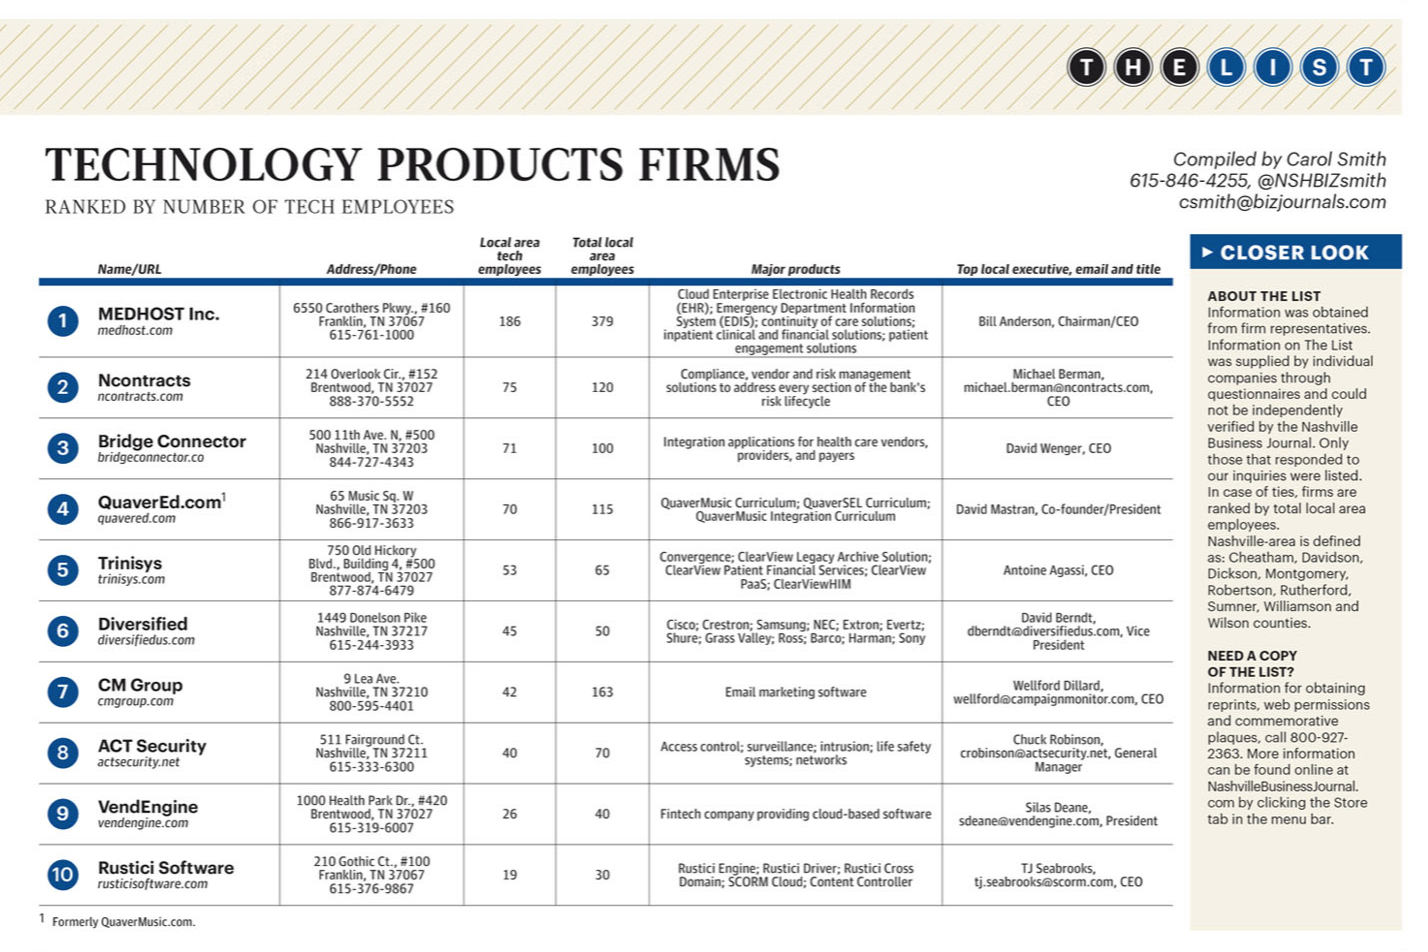 https://www.bizjournals.com/nashville/subscriber-only/2020/09/11/largest-technology-products-firms-in.html